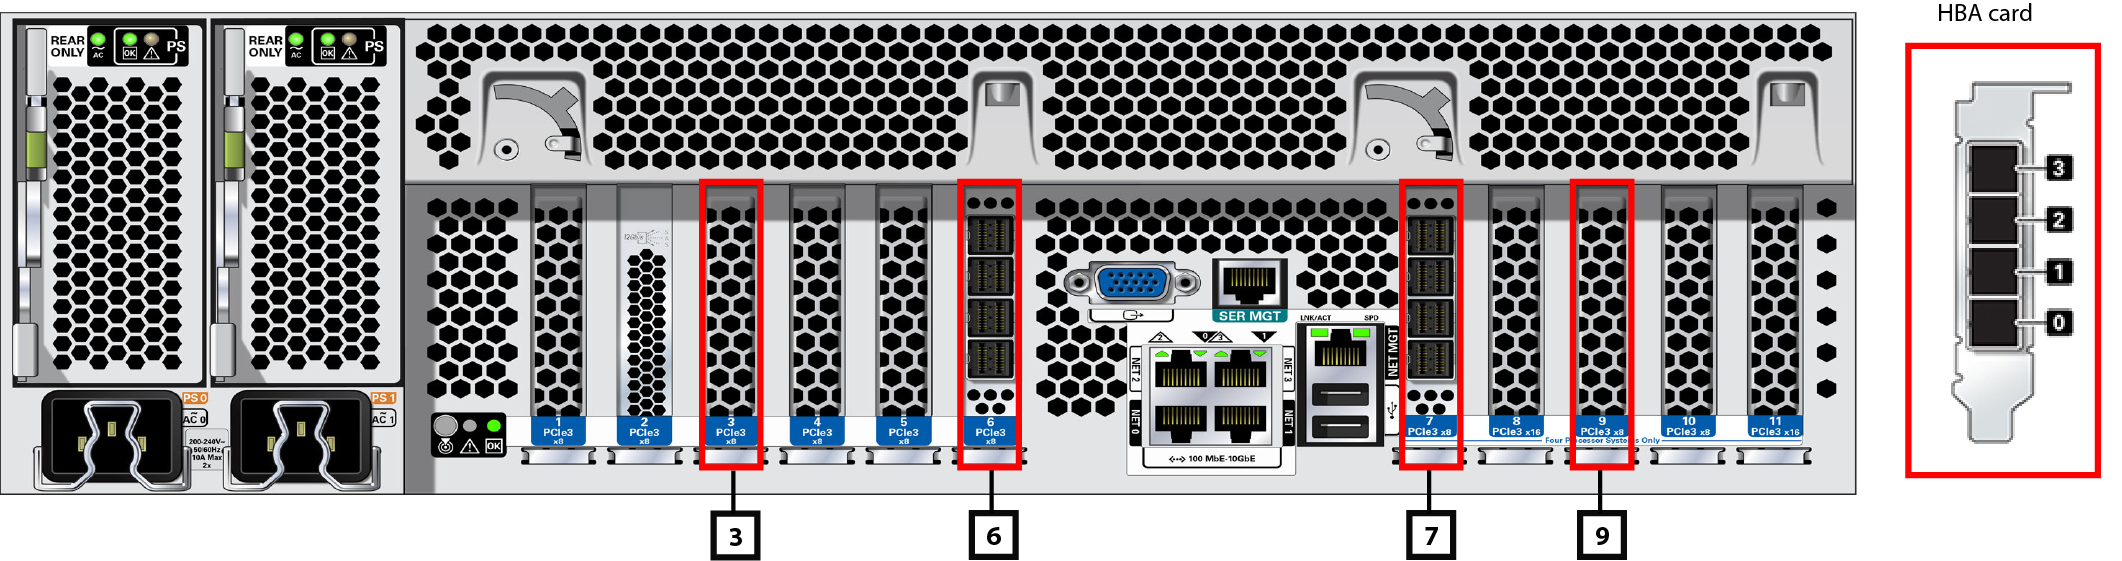 This graphic shows Oracle ZFS Storage ZS5-4 Back Panel with HBA Slot Numbers.